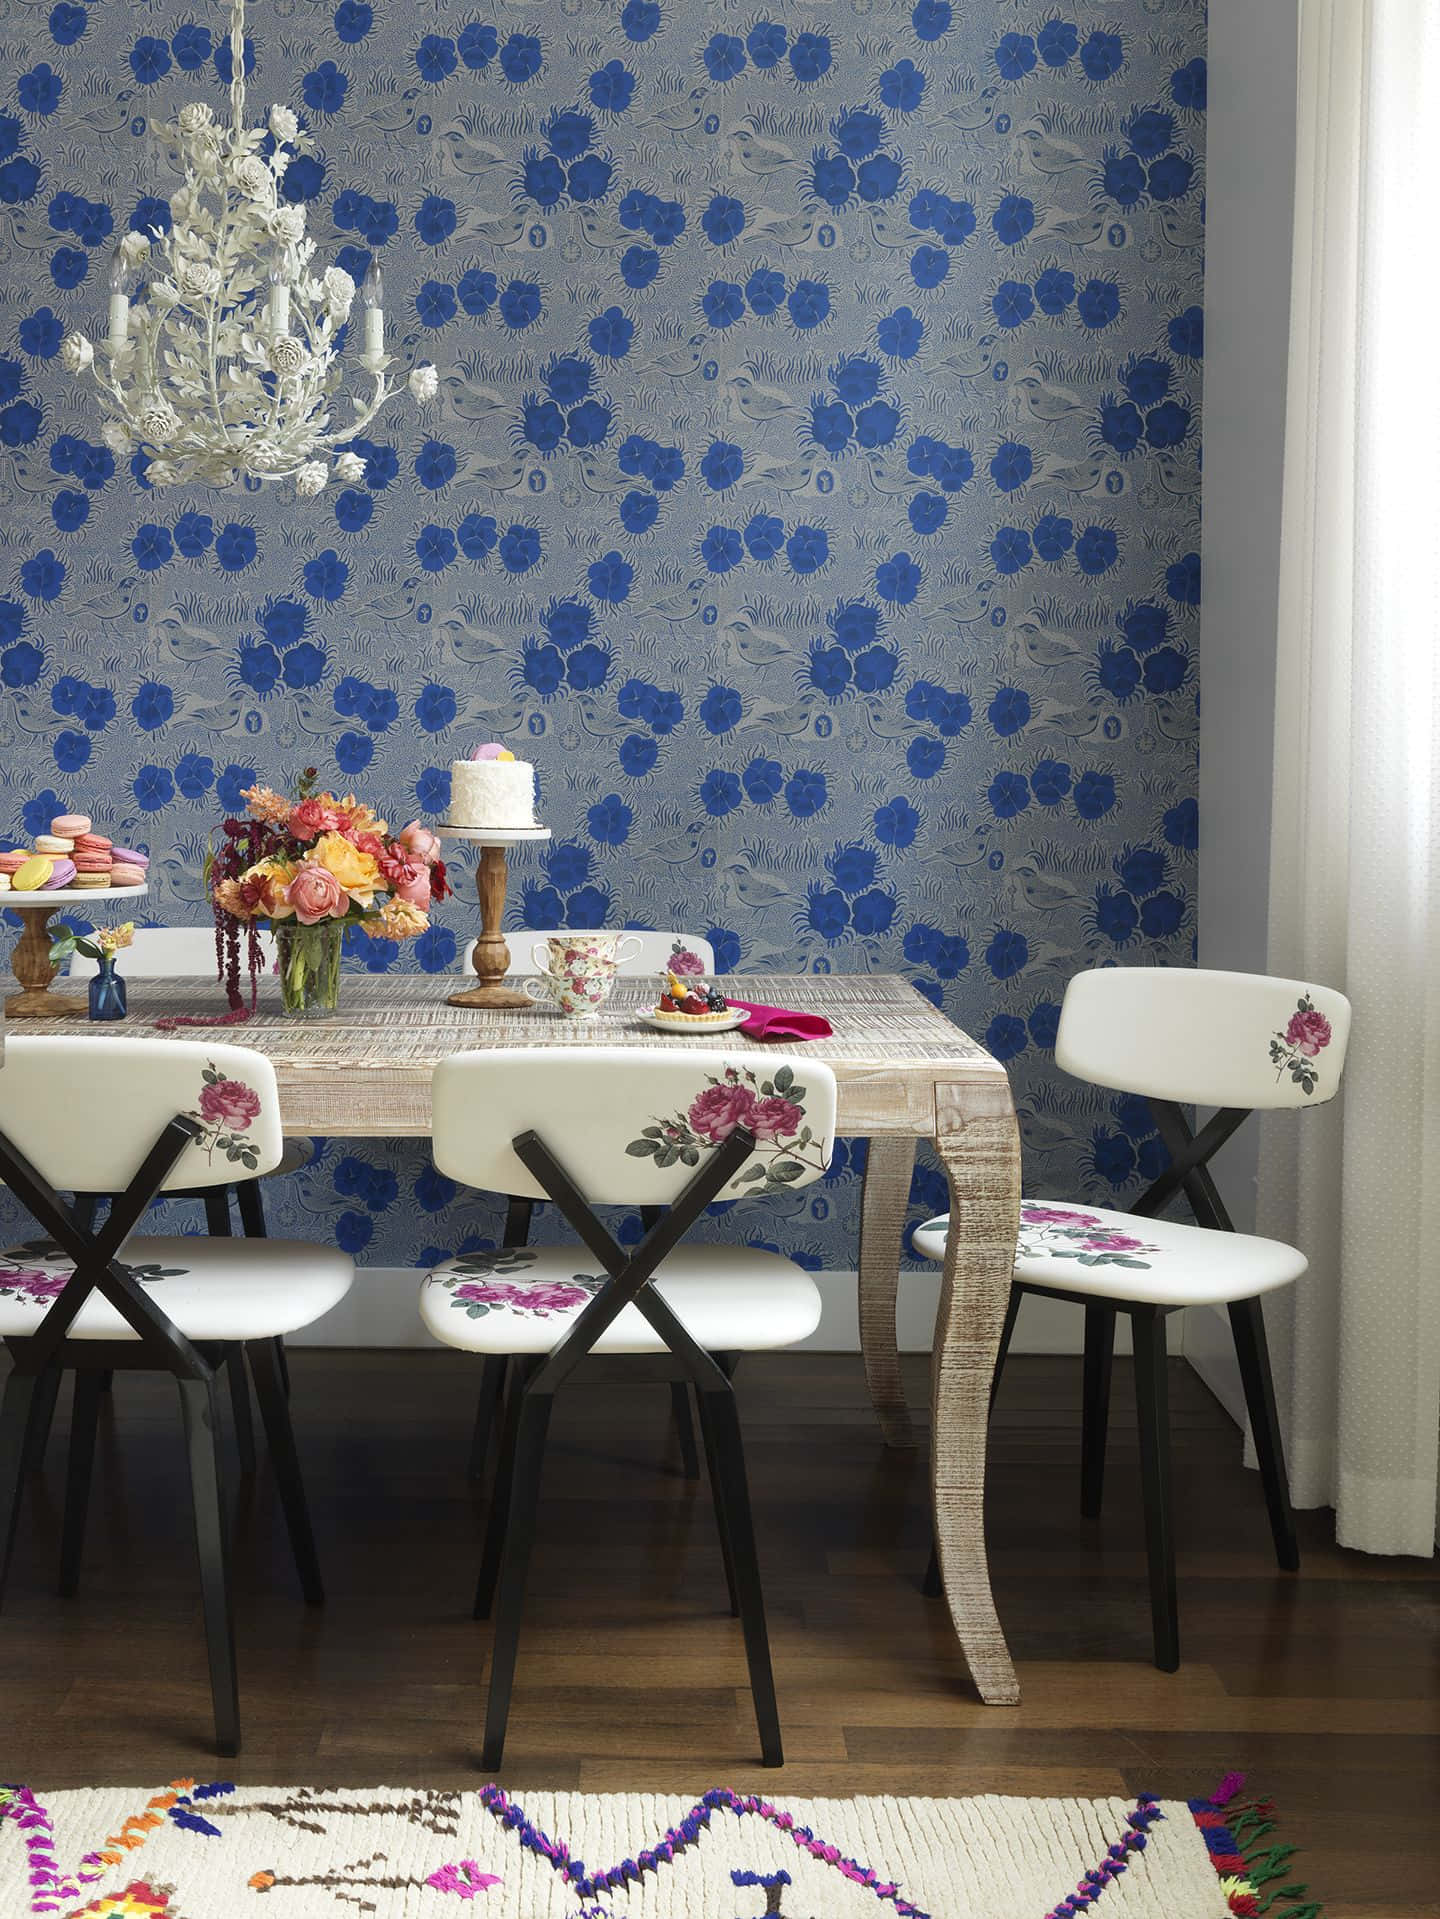 Dining Room With White Floral Chairs Background